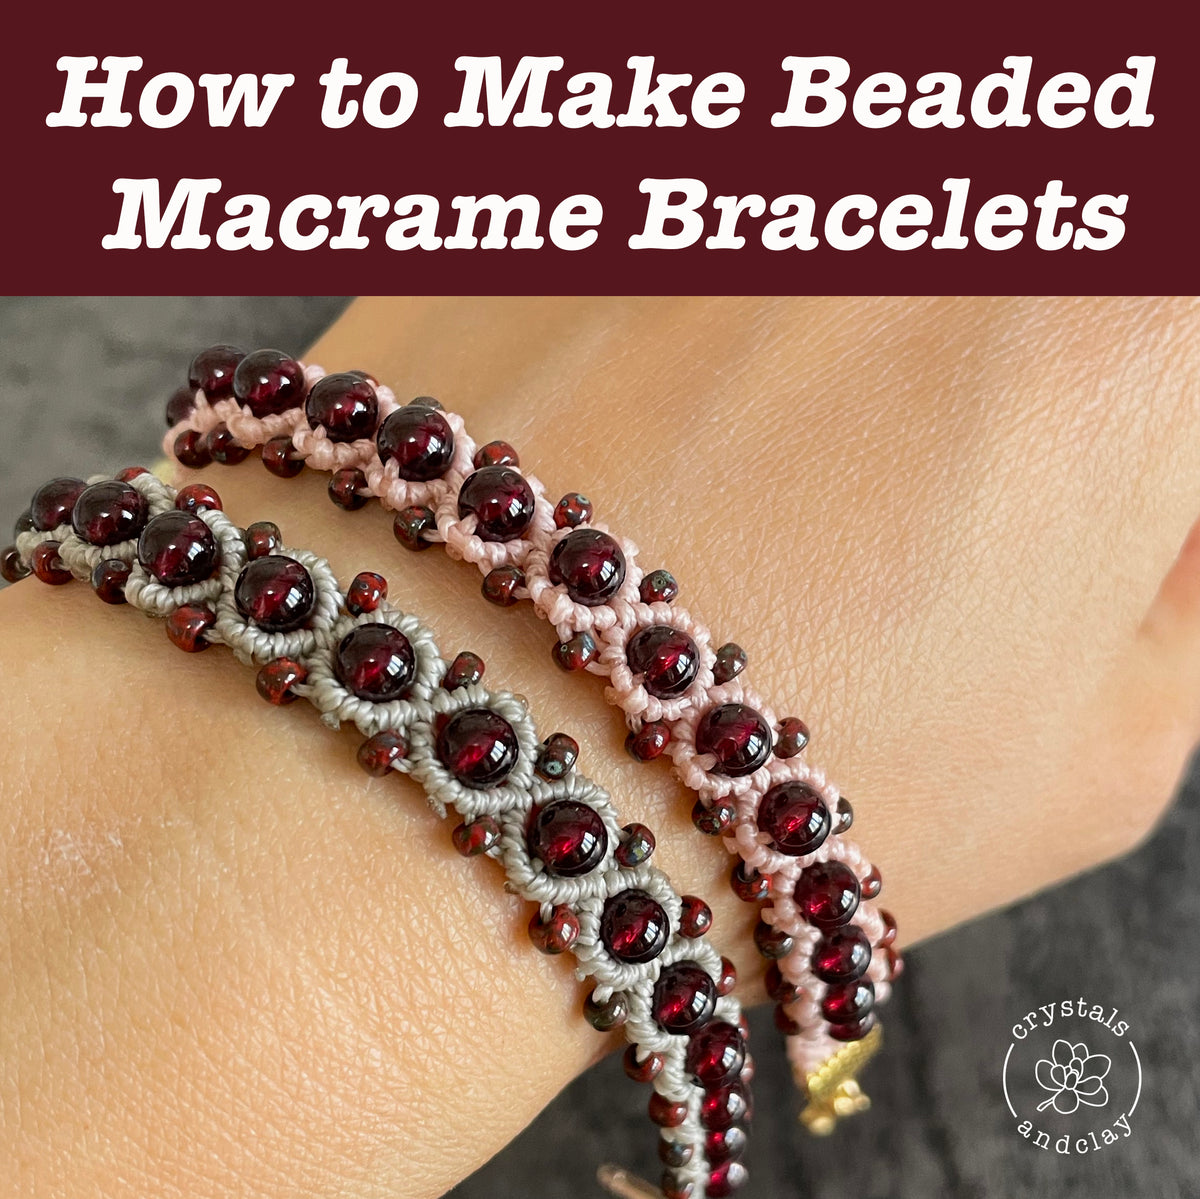 How To Make Leather Jewelry Tutorials / The Beading Gem